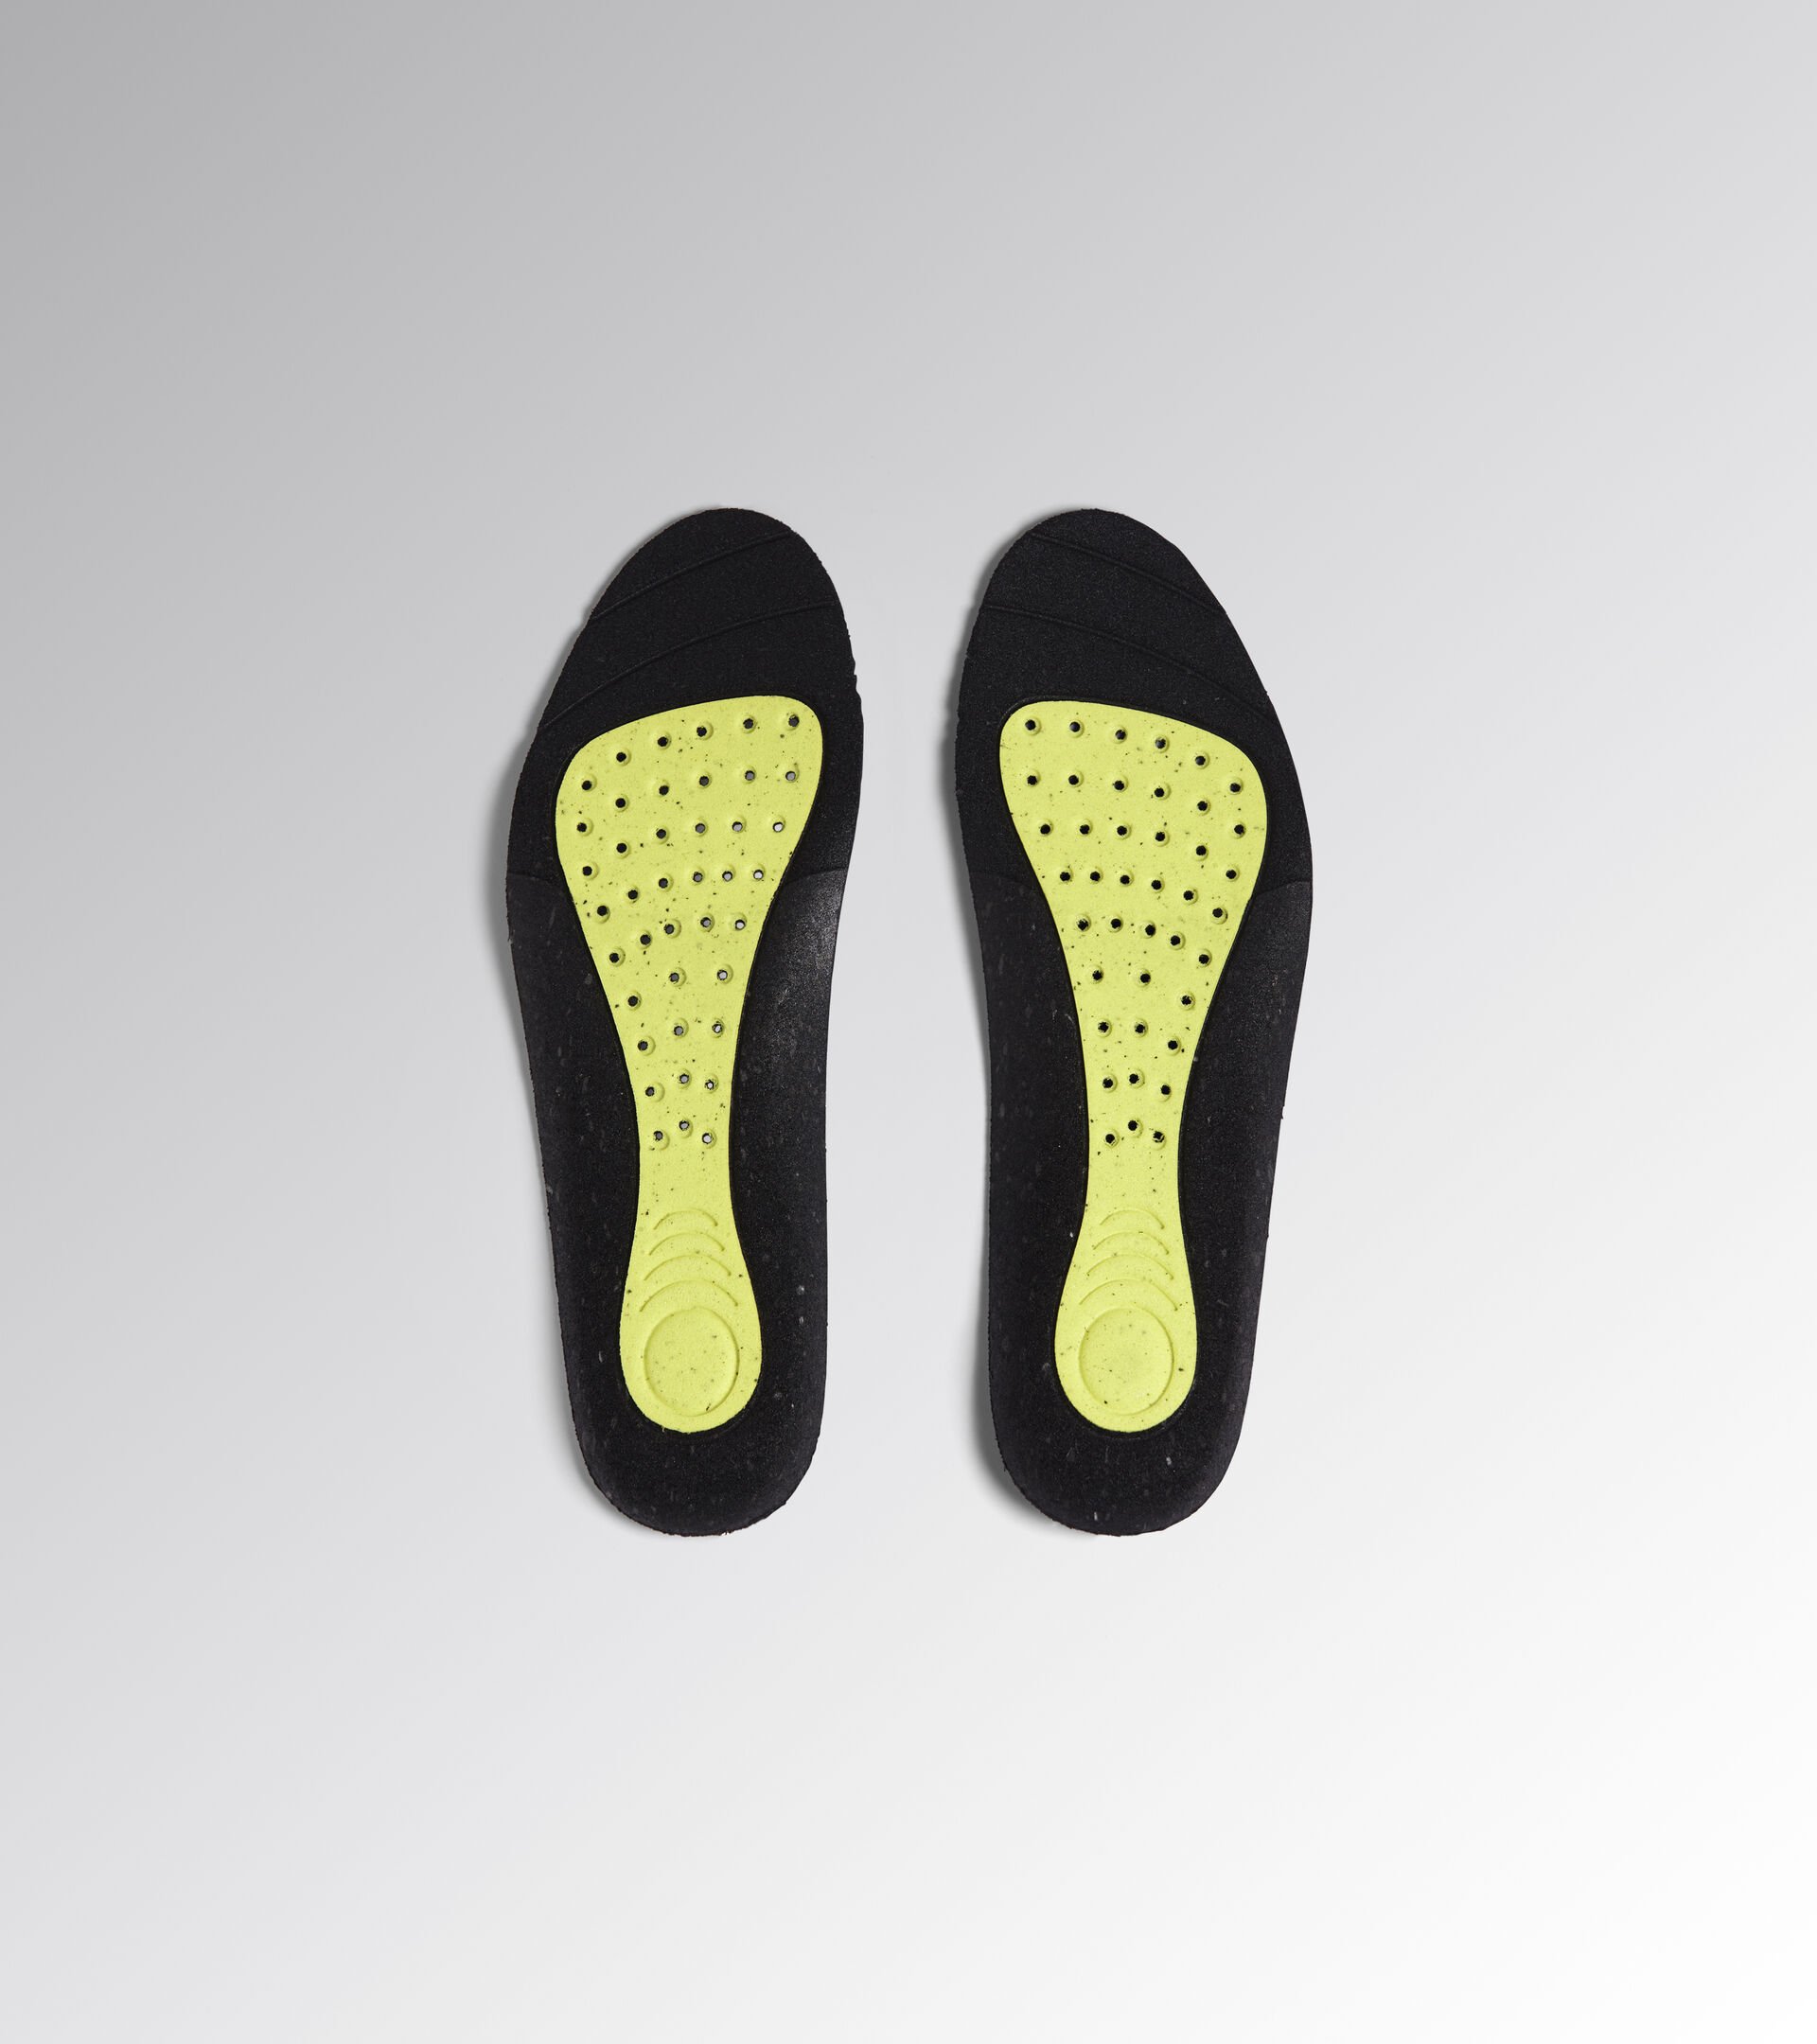 Insoles for Utility shoes INSOLE NBS BLACK - Utility